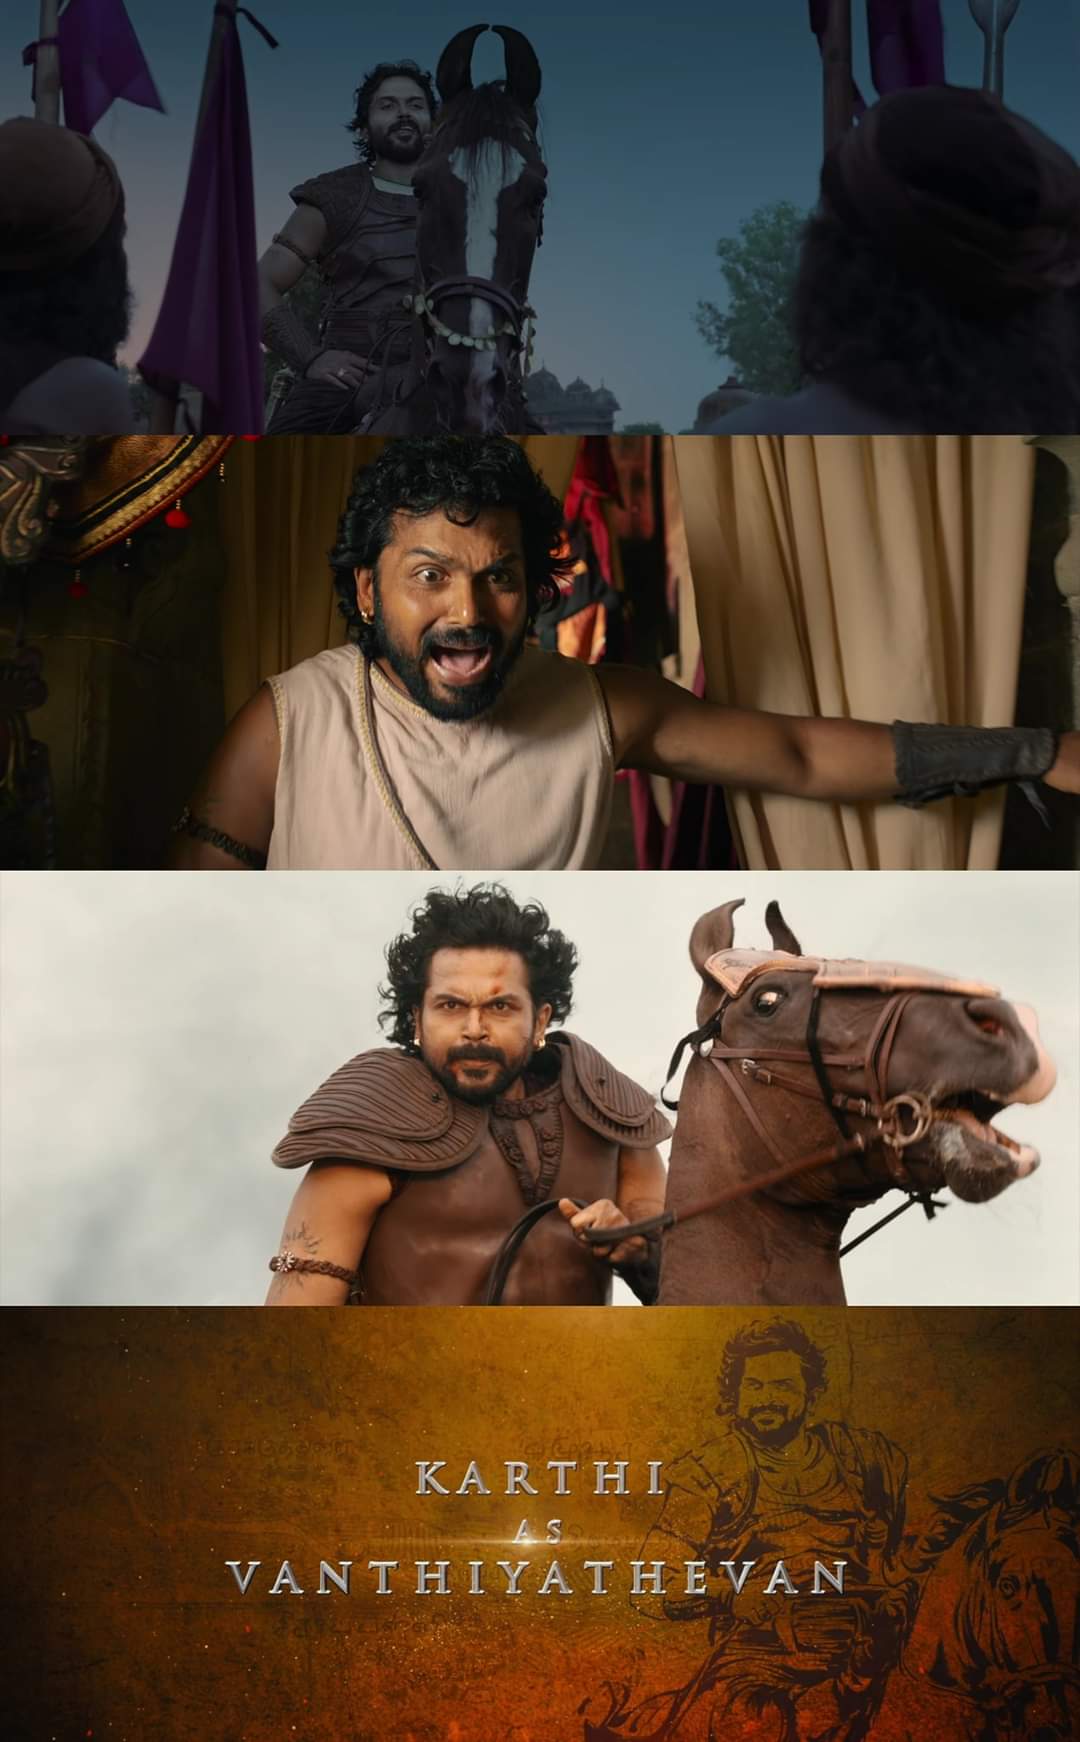 Ponniyin Selvan PS2 Movie TN rights acquired by Red giant movies